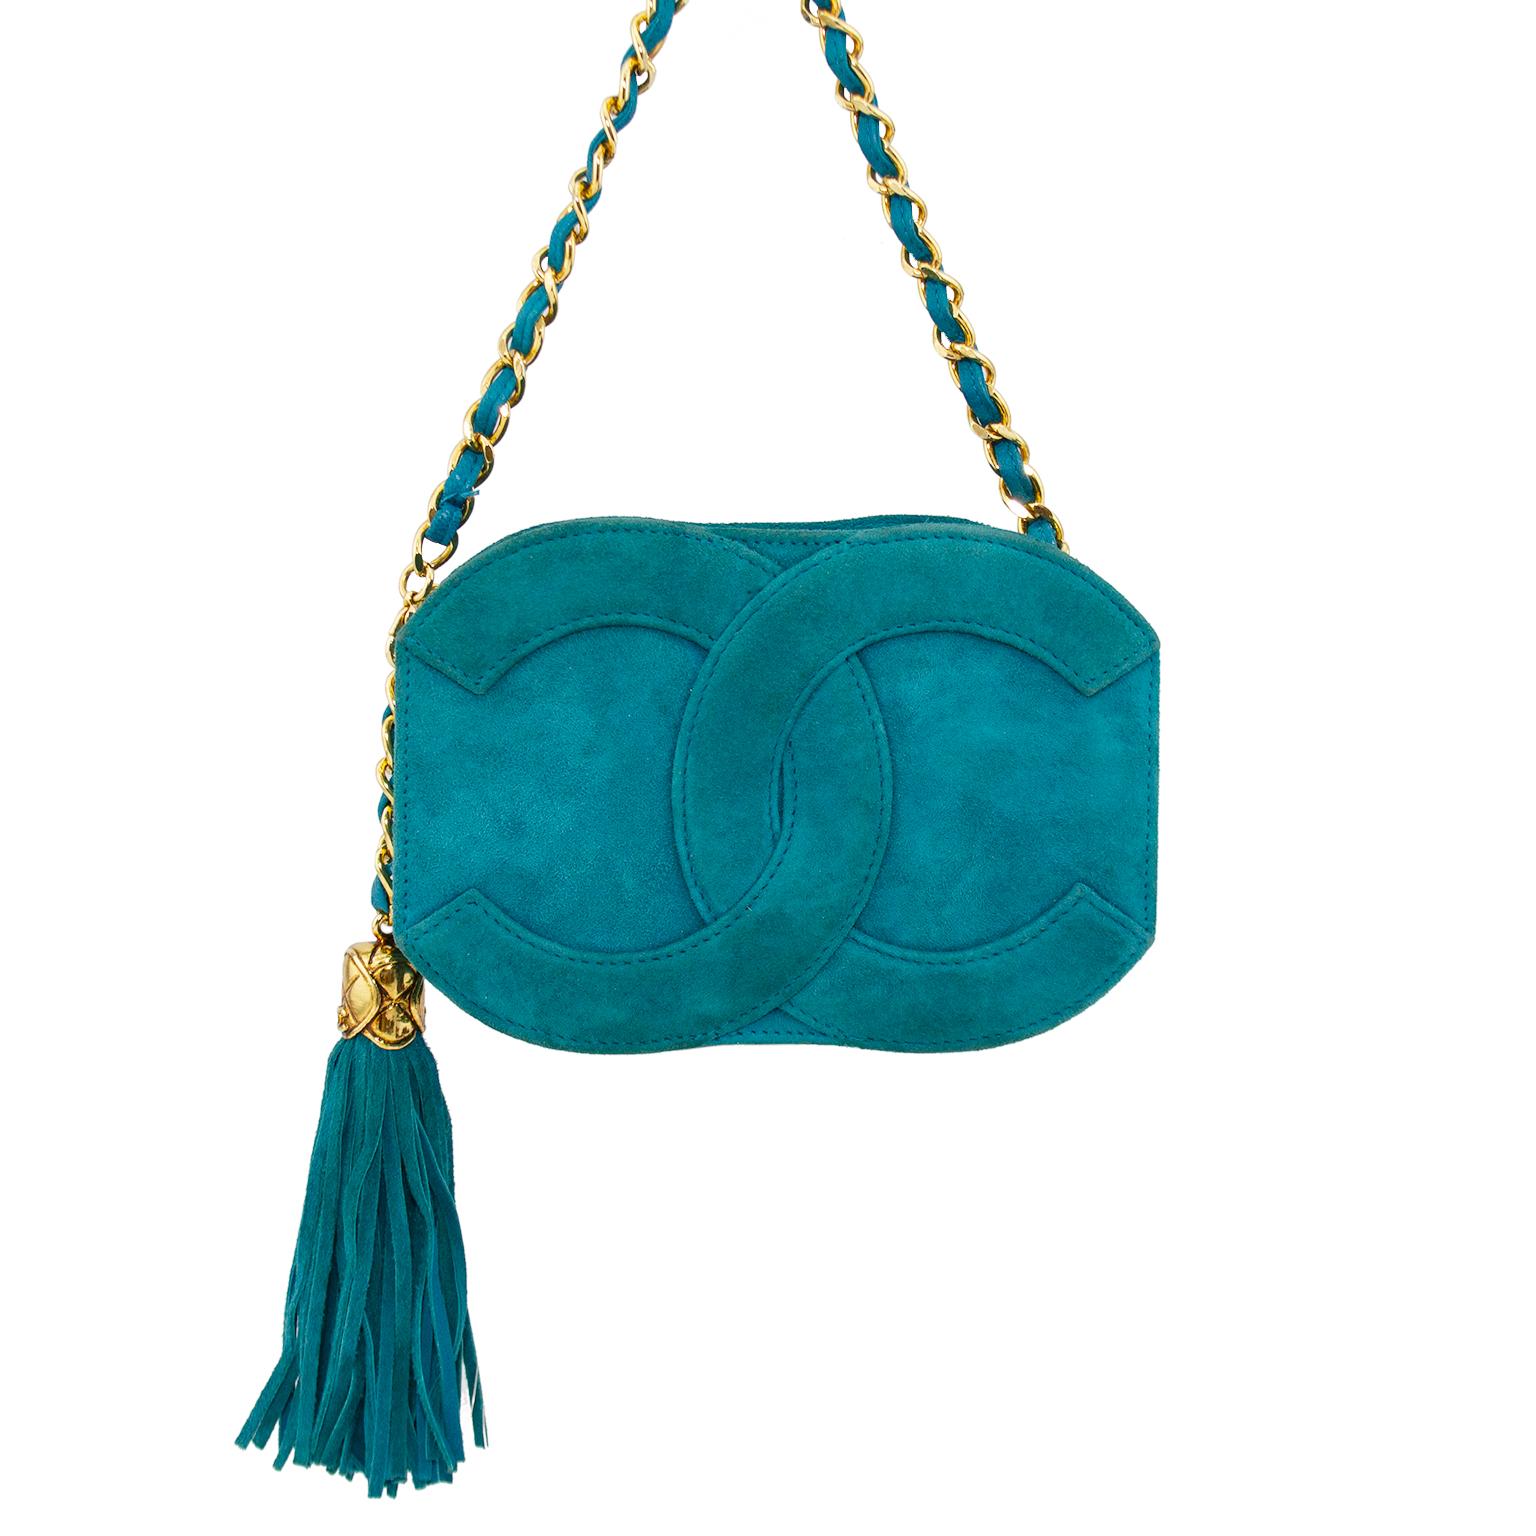 Looking for small daytime and evening bag with a pop of colour? This Chanel bag is for you. teal suede with a large interlocking cc logo on the front and back. The corners of the rectangular shape are rounded with the curve of the logos. Large and